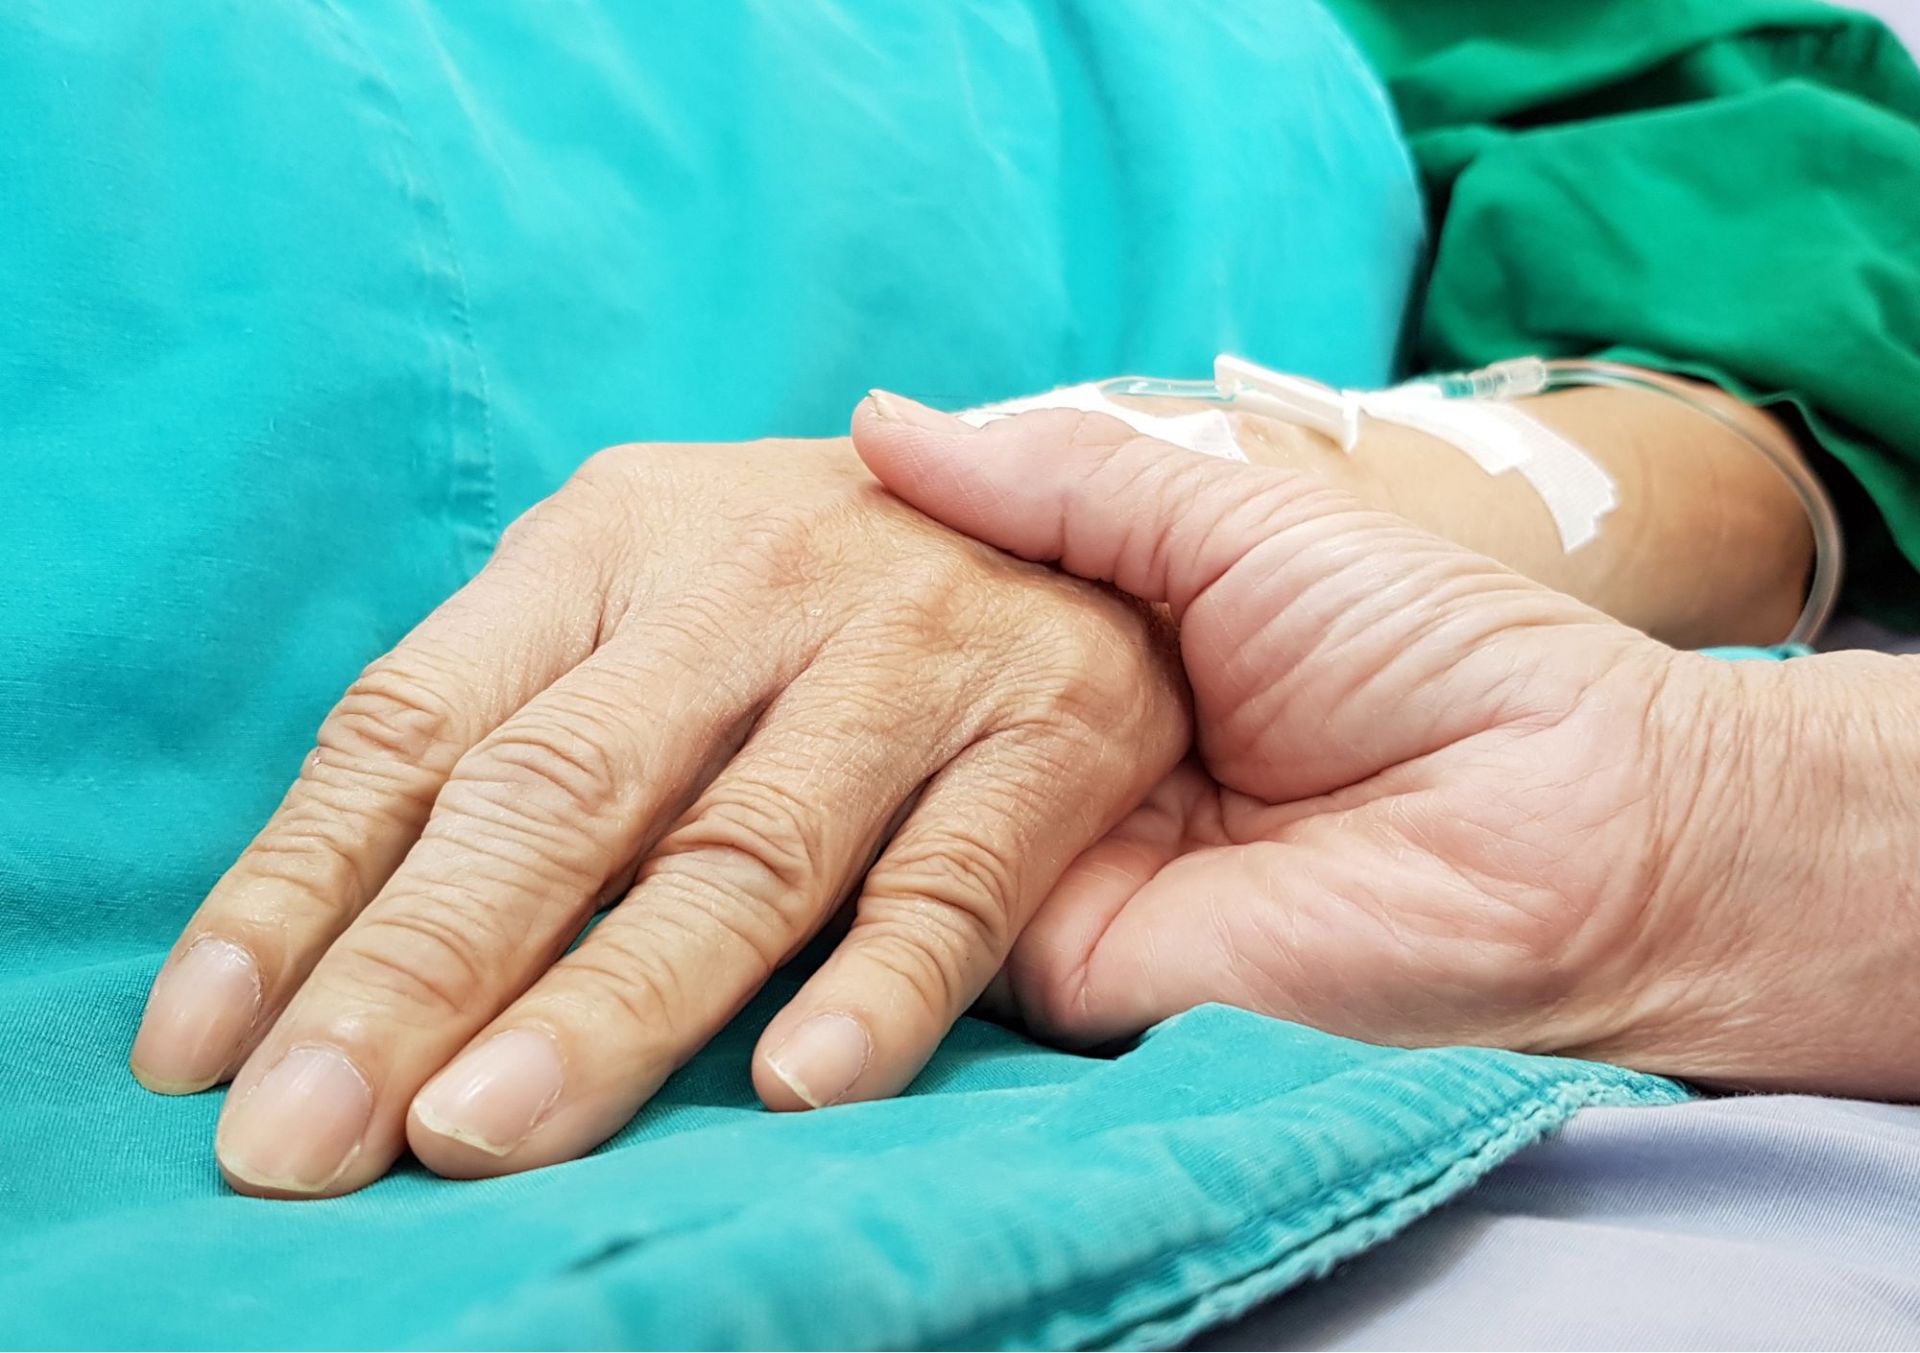 L3 Certificate in Principles of End of Life Care